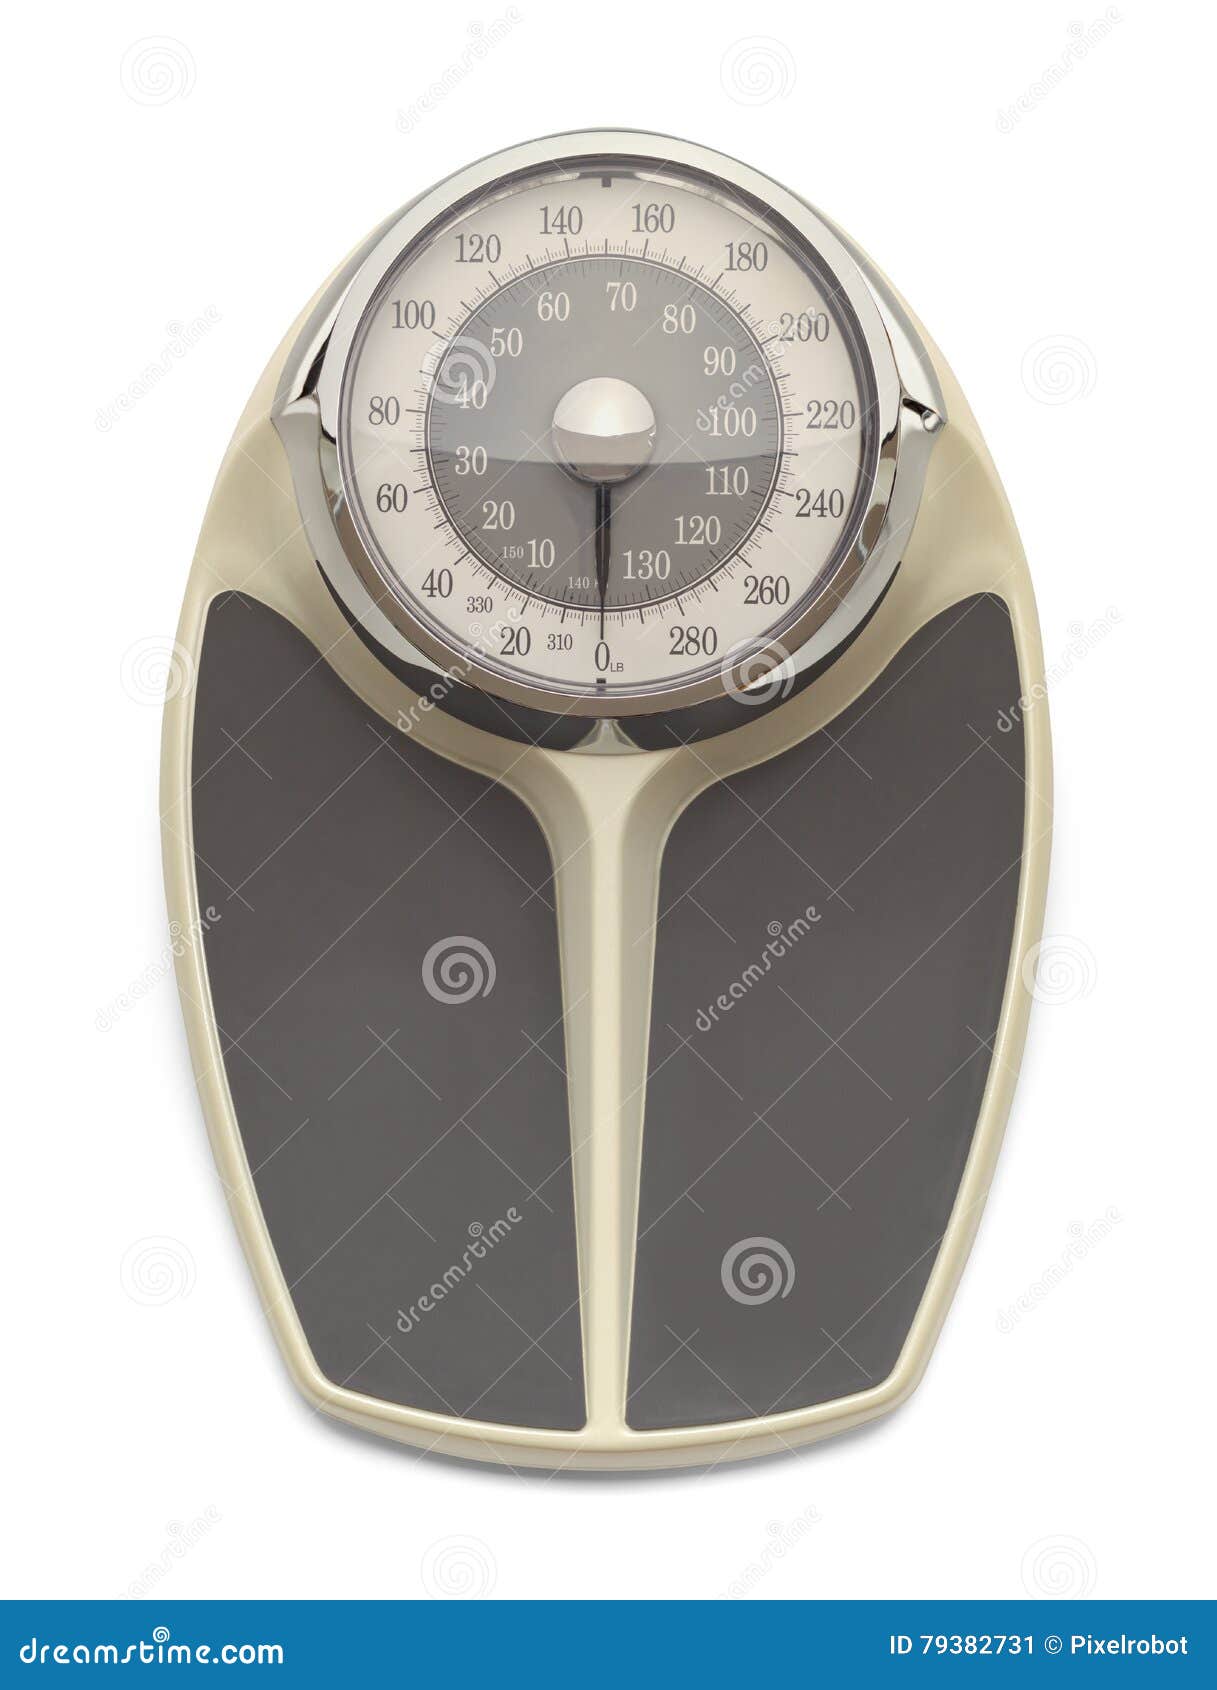 Analog Weight Scale Isolated Stock Photo, Picture and Royalty Free